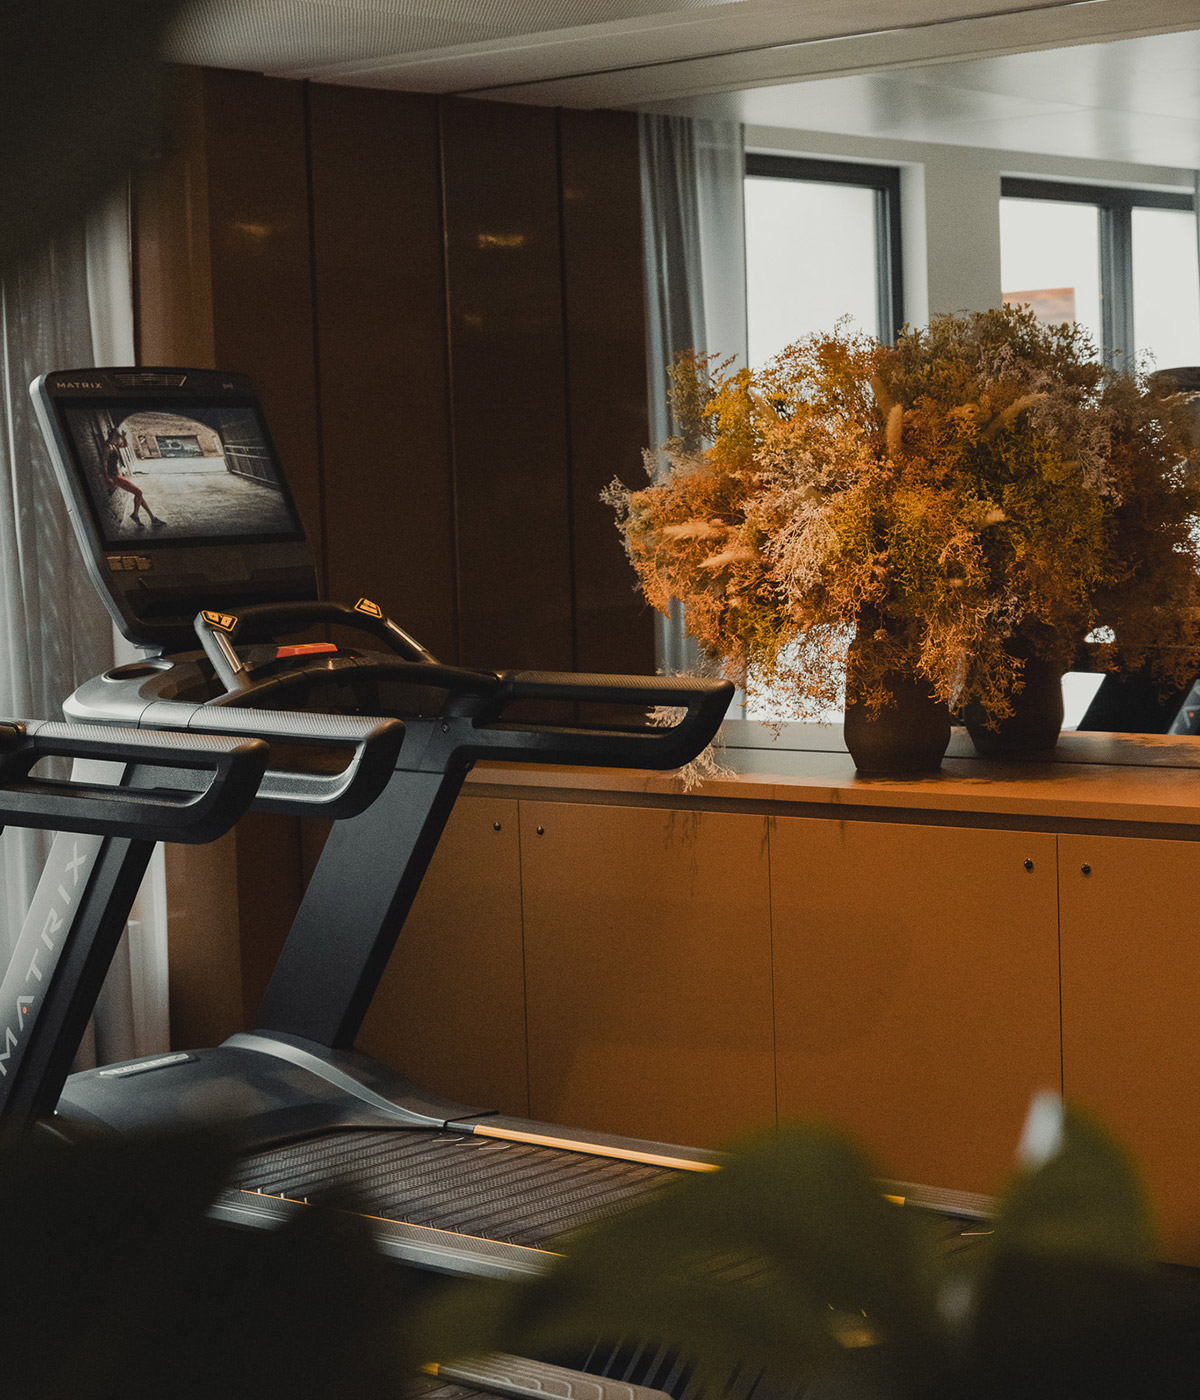 Treadmill next to a mirror in the hotel fitness room